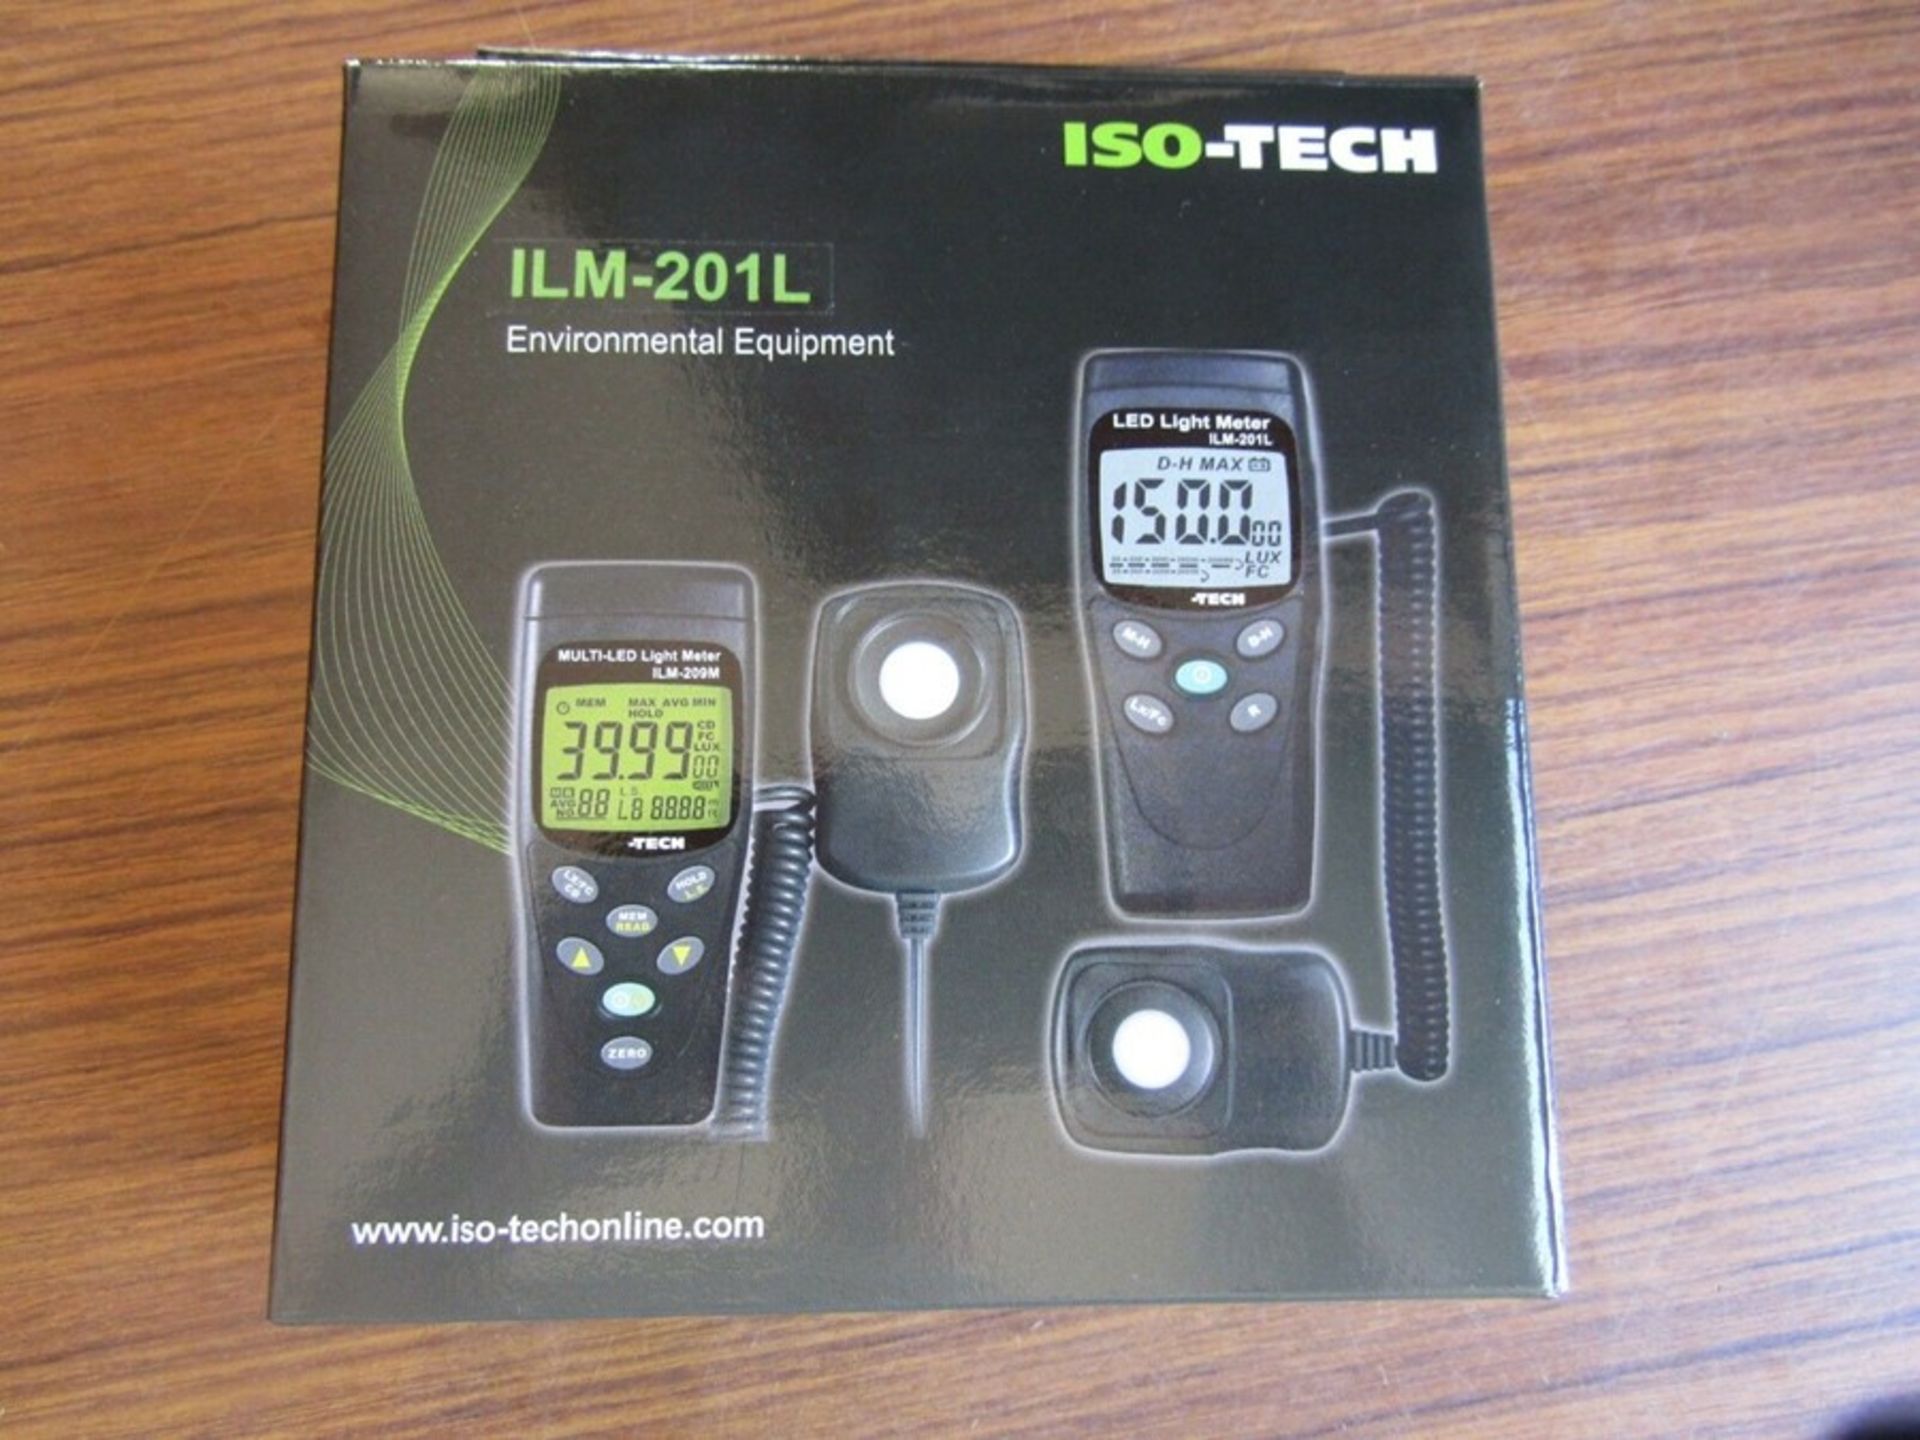 NEW ISOTECH ILM201L LUX/FC LED Light Meter - J2 8765174 - Image 3 of 4